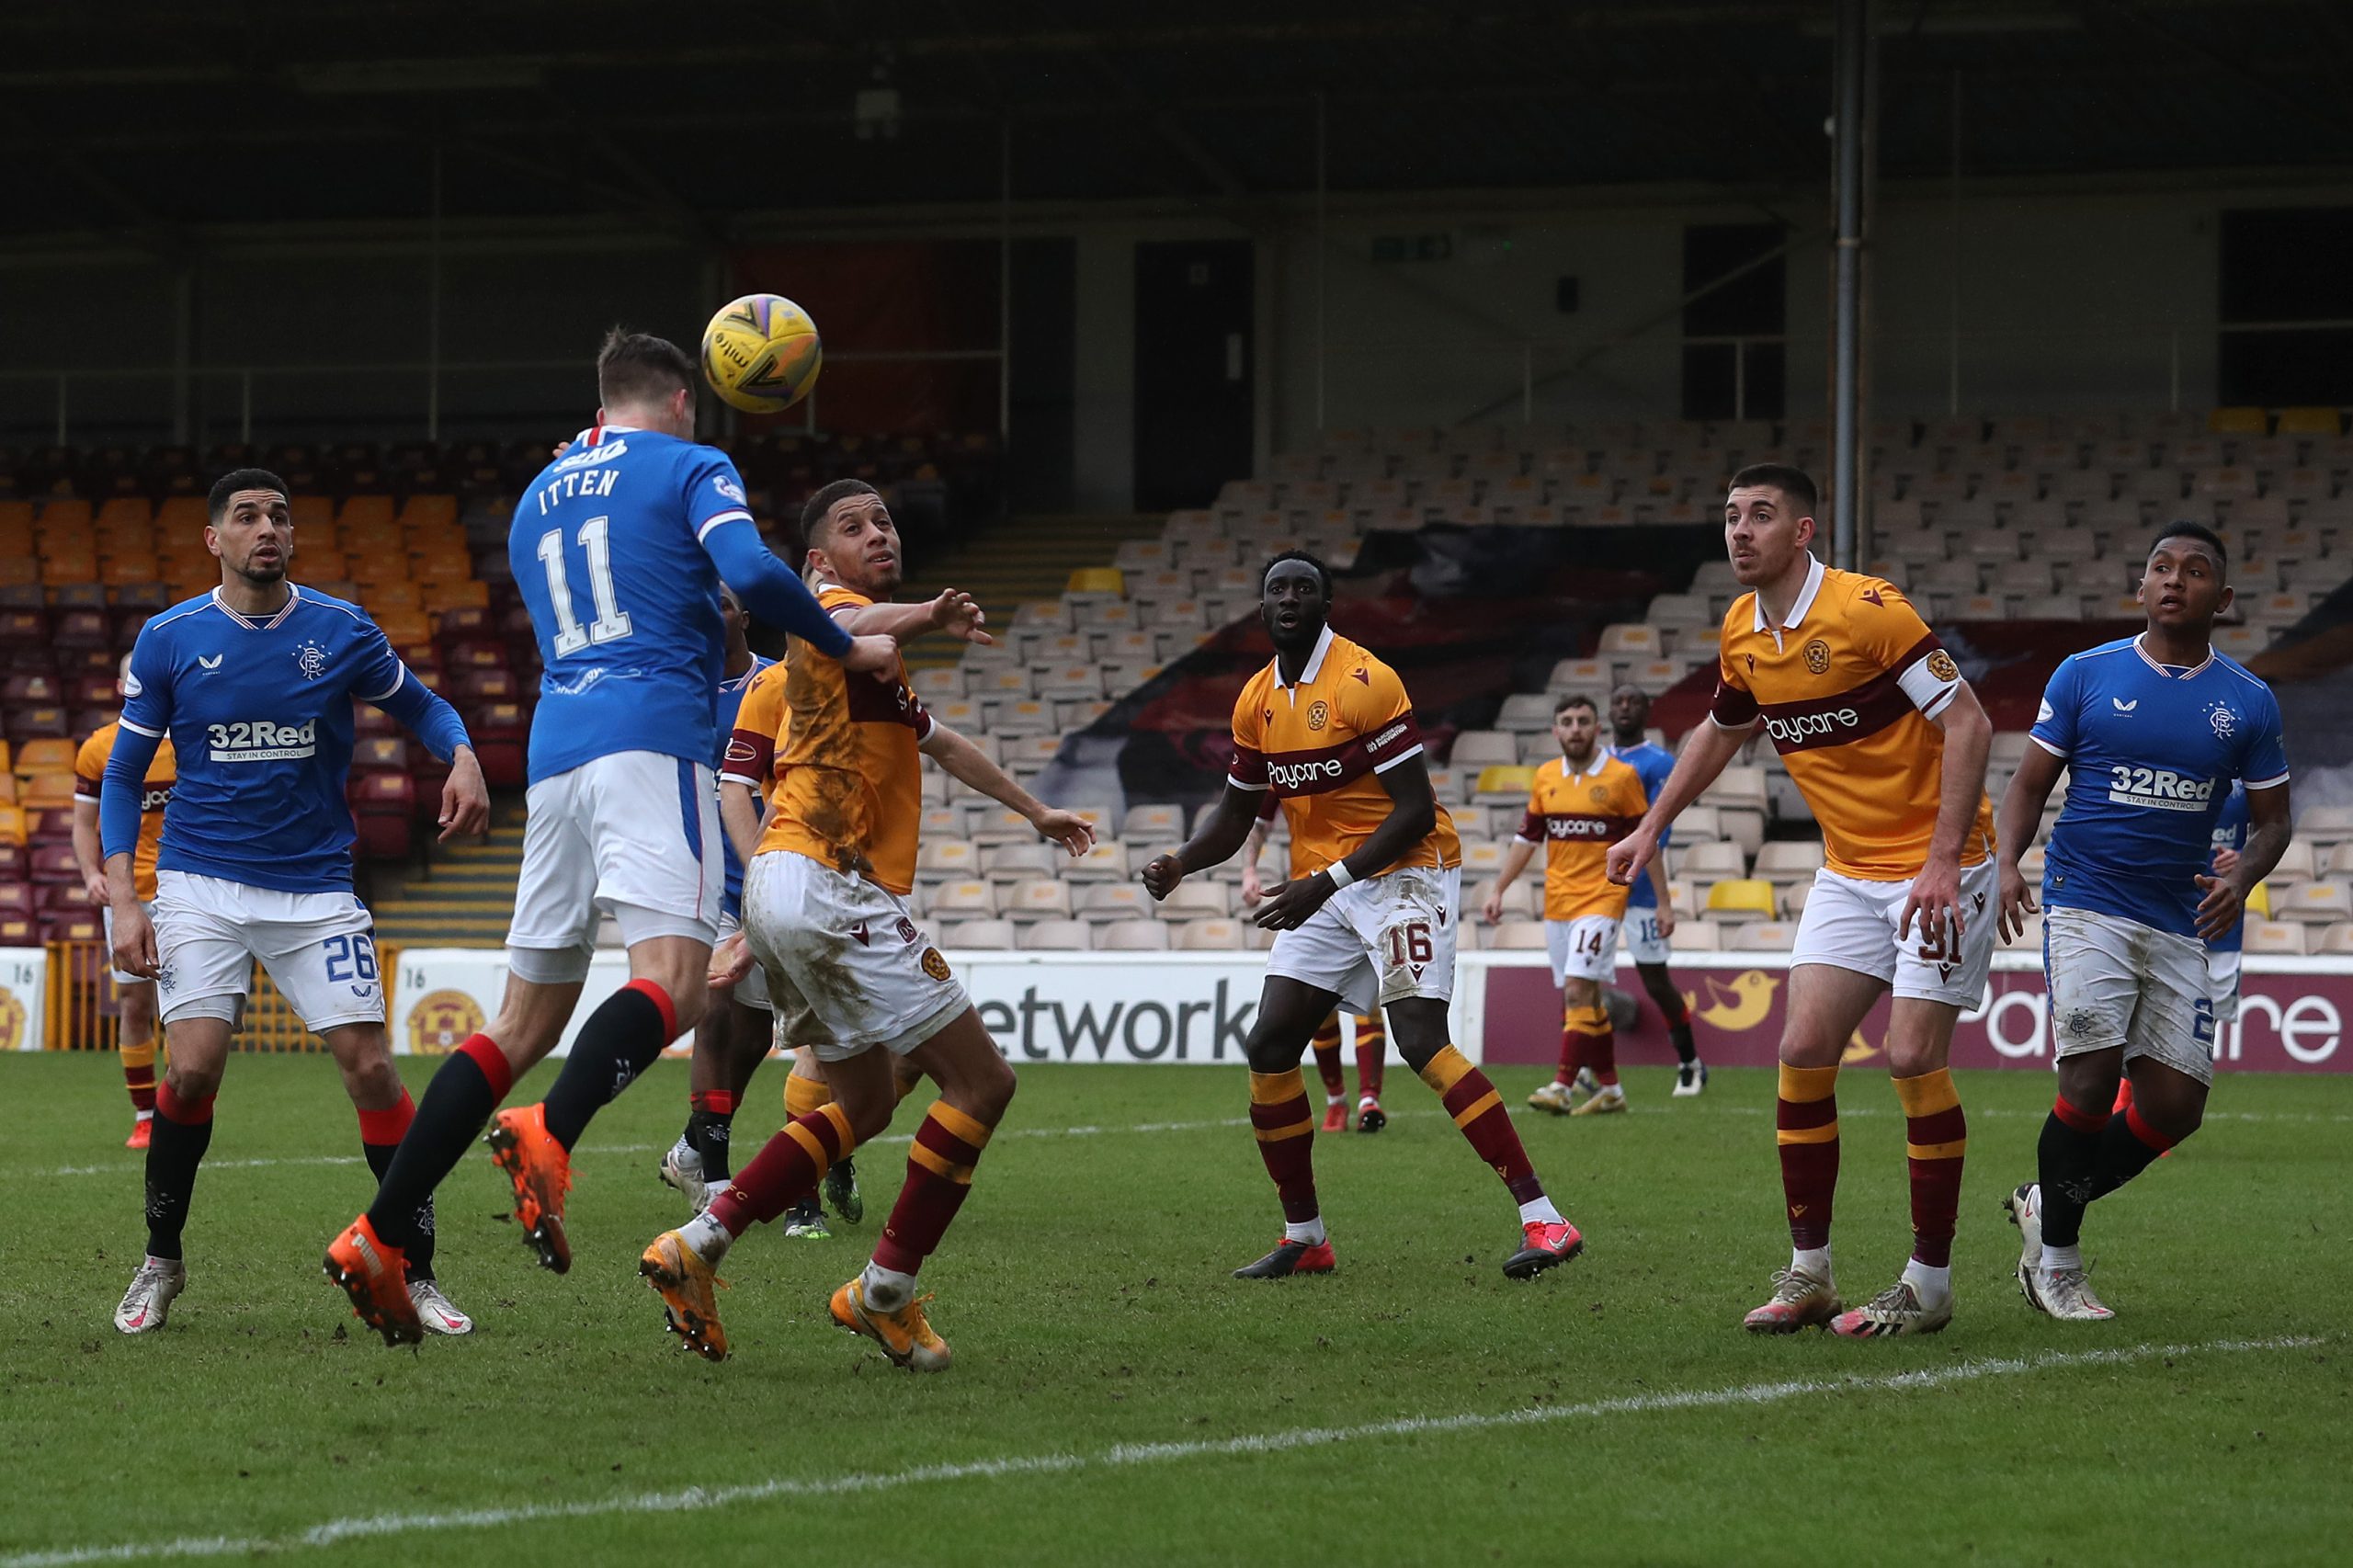 MOTHERWELL, SCOTLAND - JANUARY 17: Cedric Itten of Rangers  scores their team's first goal during the Ladbrokes Scottish Premiership match between Motherwell and Rangers at Fir Park on January 17, 2021 in Motherwell, Scotland. Sporting stadiums around Scotland remain under strict restrictions due to the Coronavirus Pandemic as Government social distancing laws prohibit fans inside venues resulting in games being played behind closed doors. (Photo by Ian MacNicol/Getty Images)